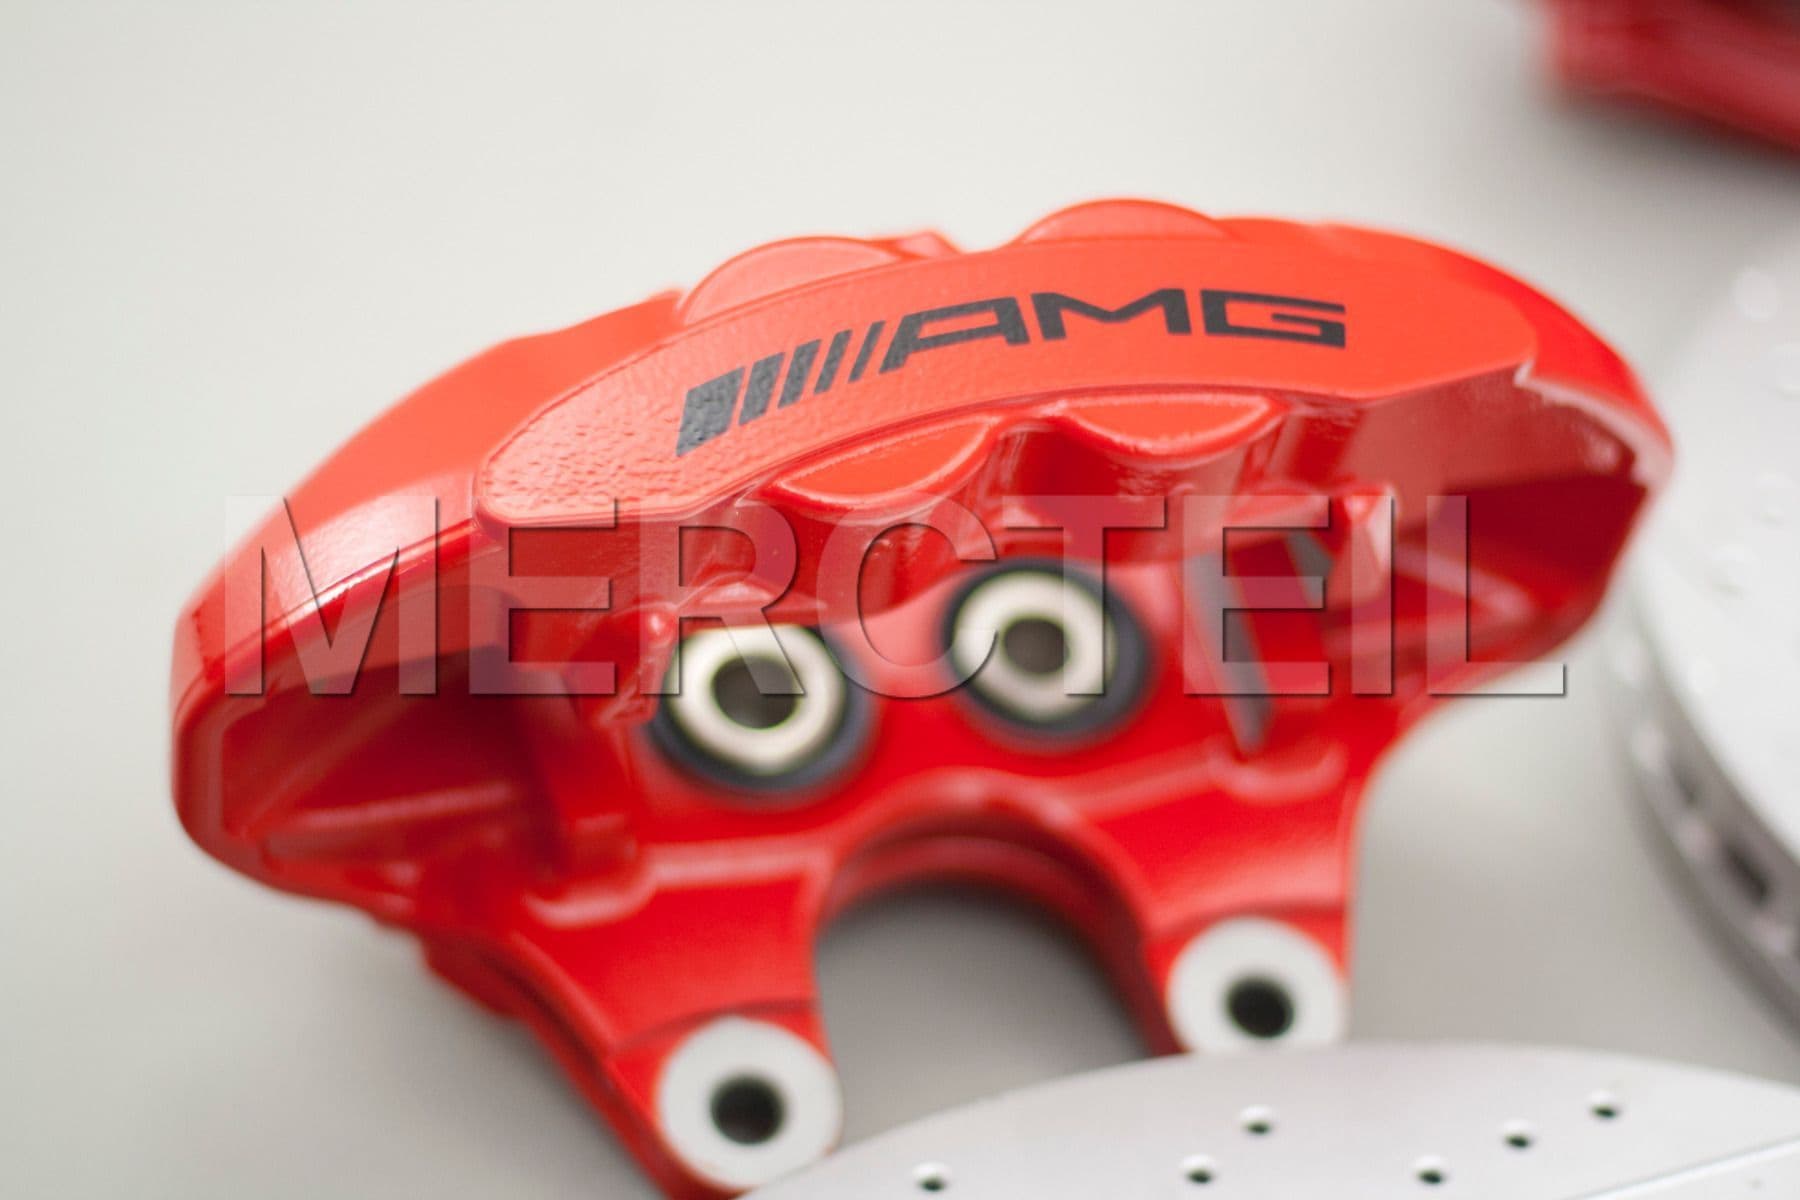 63 AMG Red Brake System for E-Class, CLS-Class